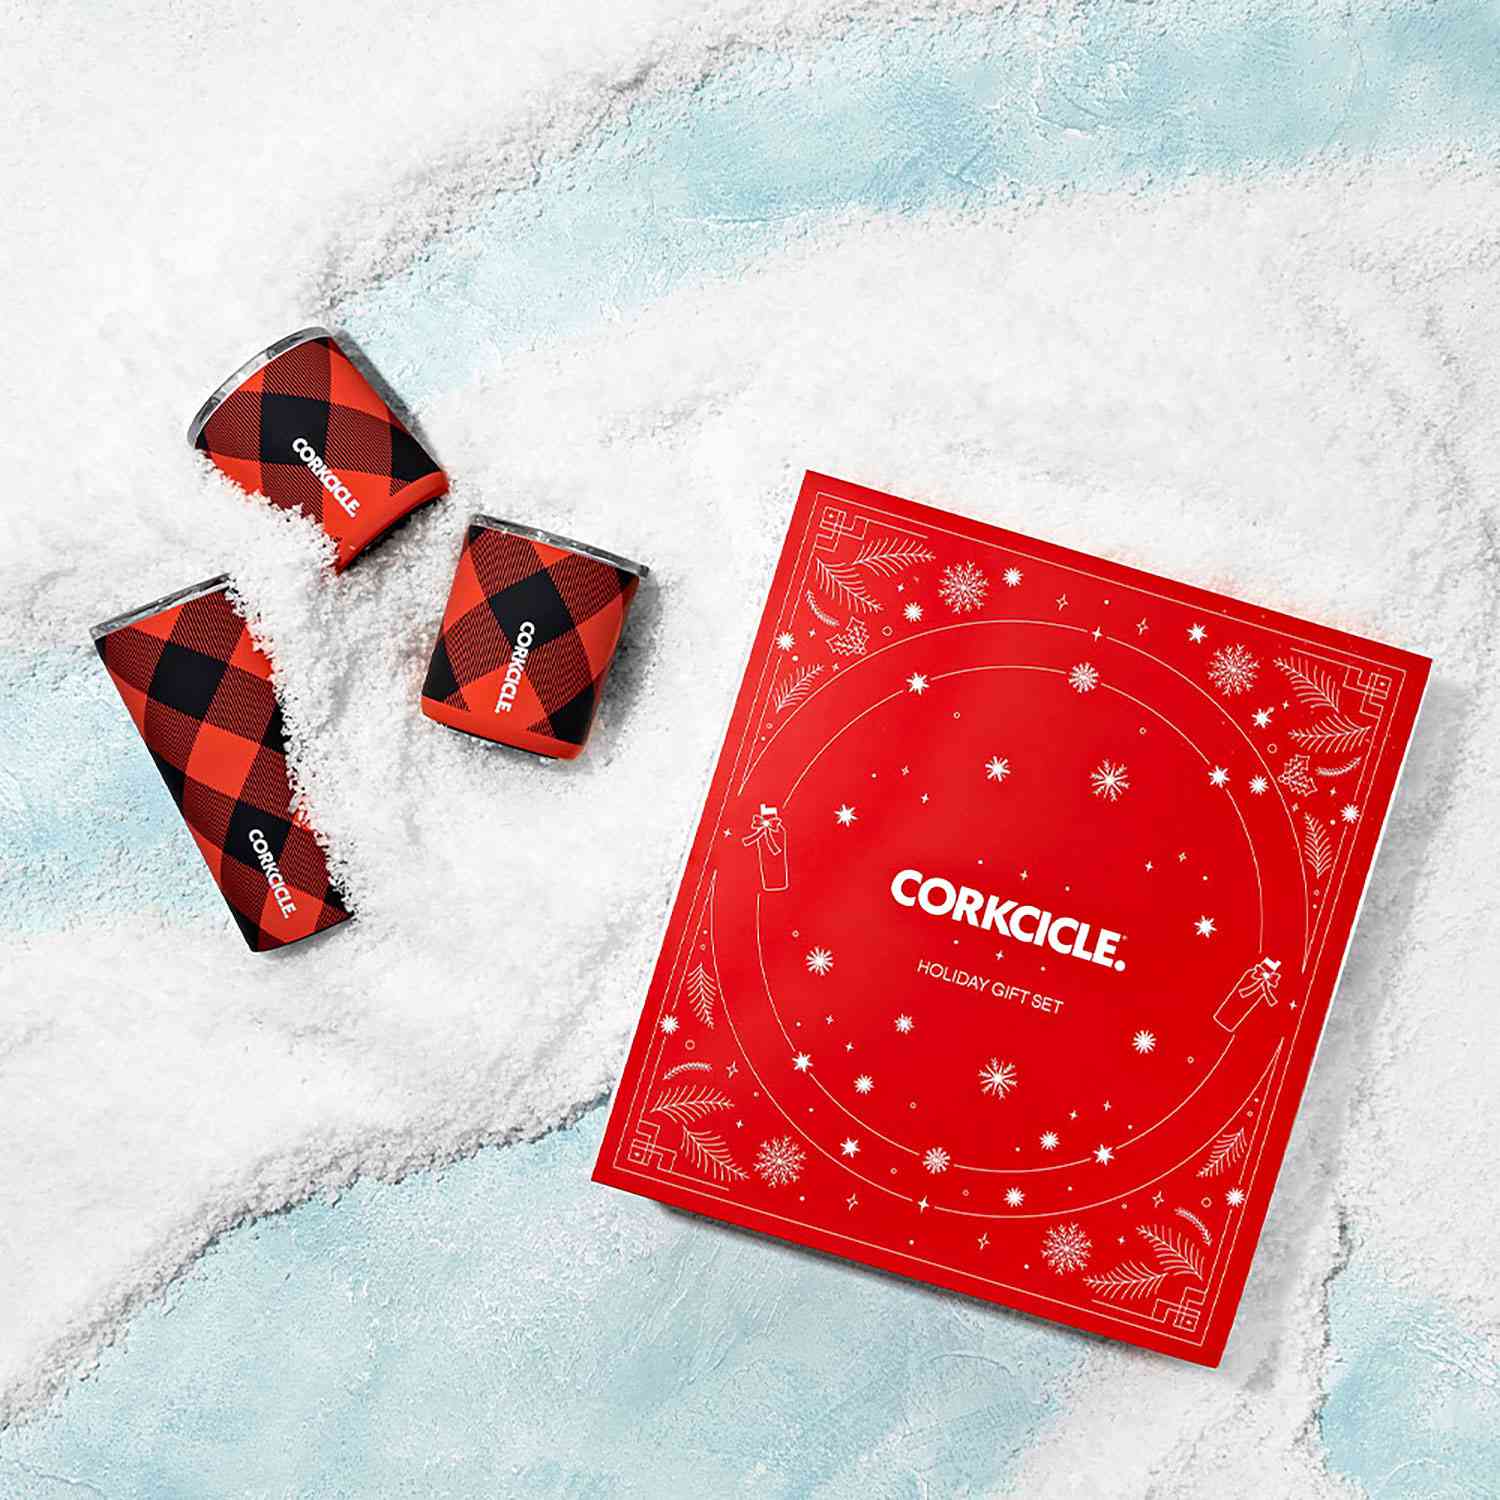 CORKCICLE Ready-To-Gift Sets – these gifts are pre-packed as kits in themes surrounding popular CORKCICLE collections.